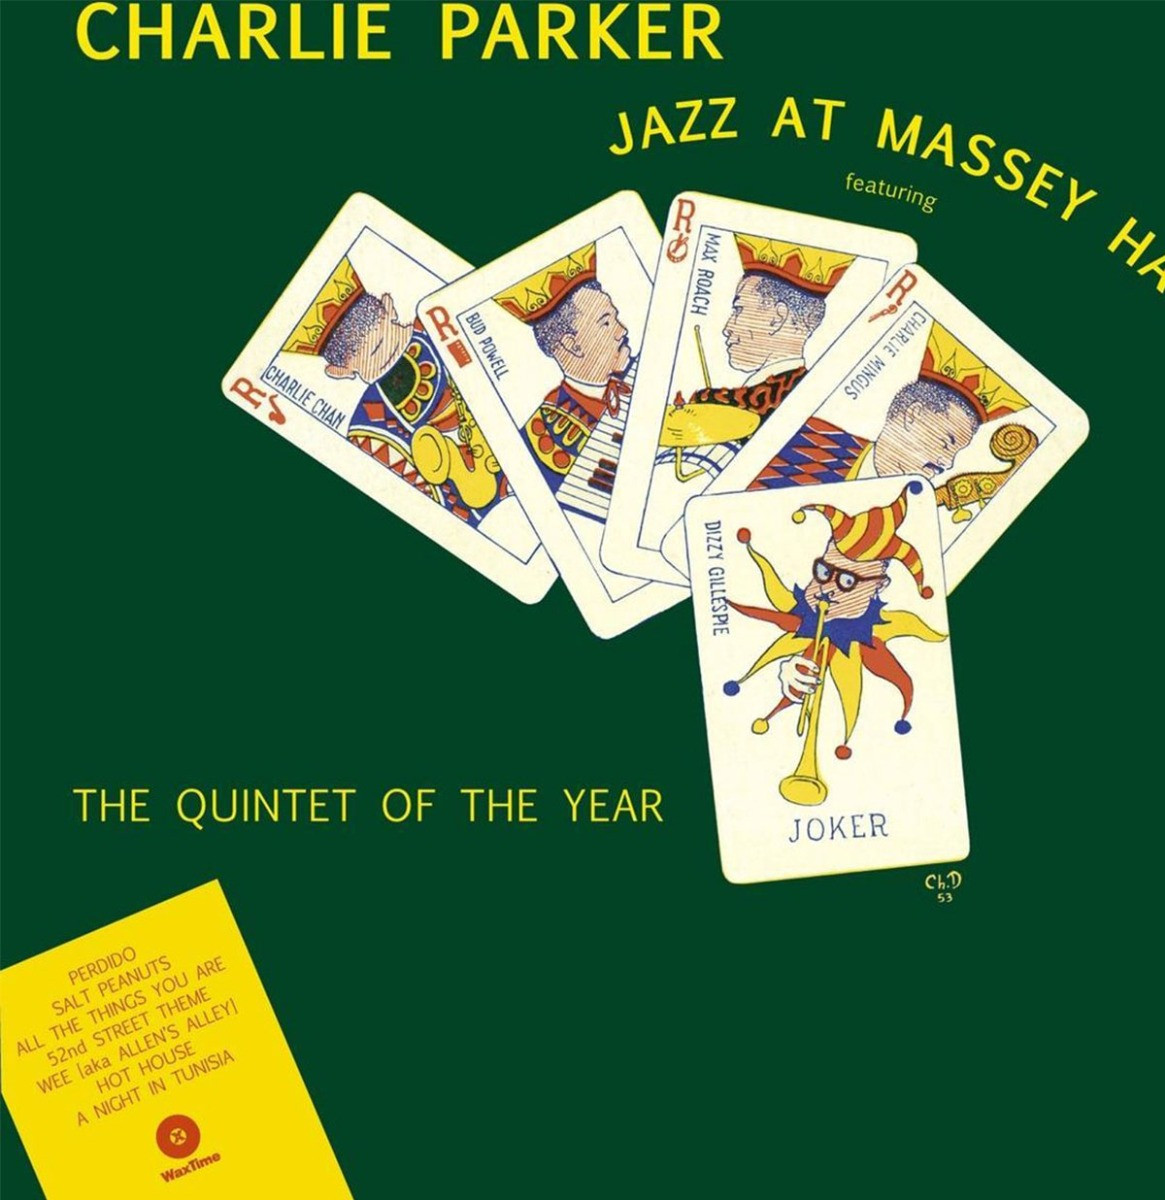 Charlie Parker Featuring Dizzy Gillespie, Bud Powell, Charles Mingus, Max Roach - Jazz At Massey Hall LP (Coloured Vinyl)